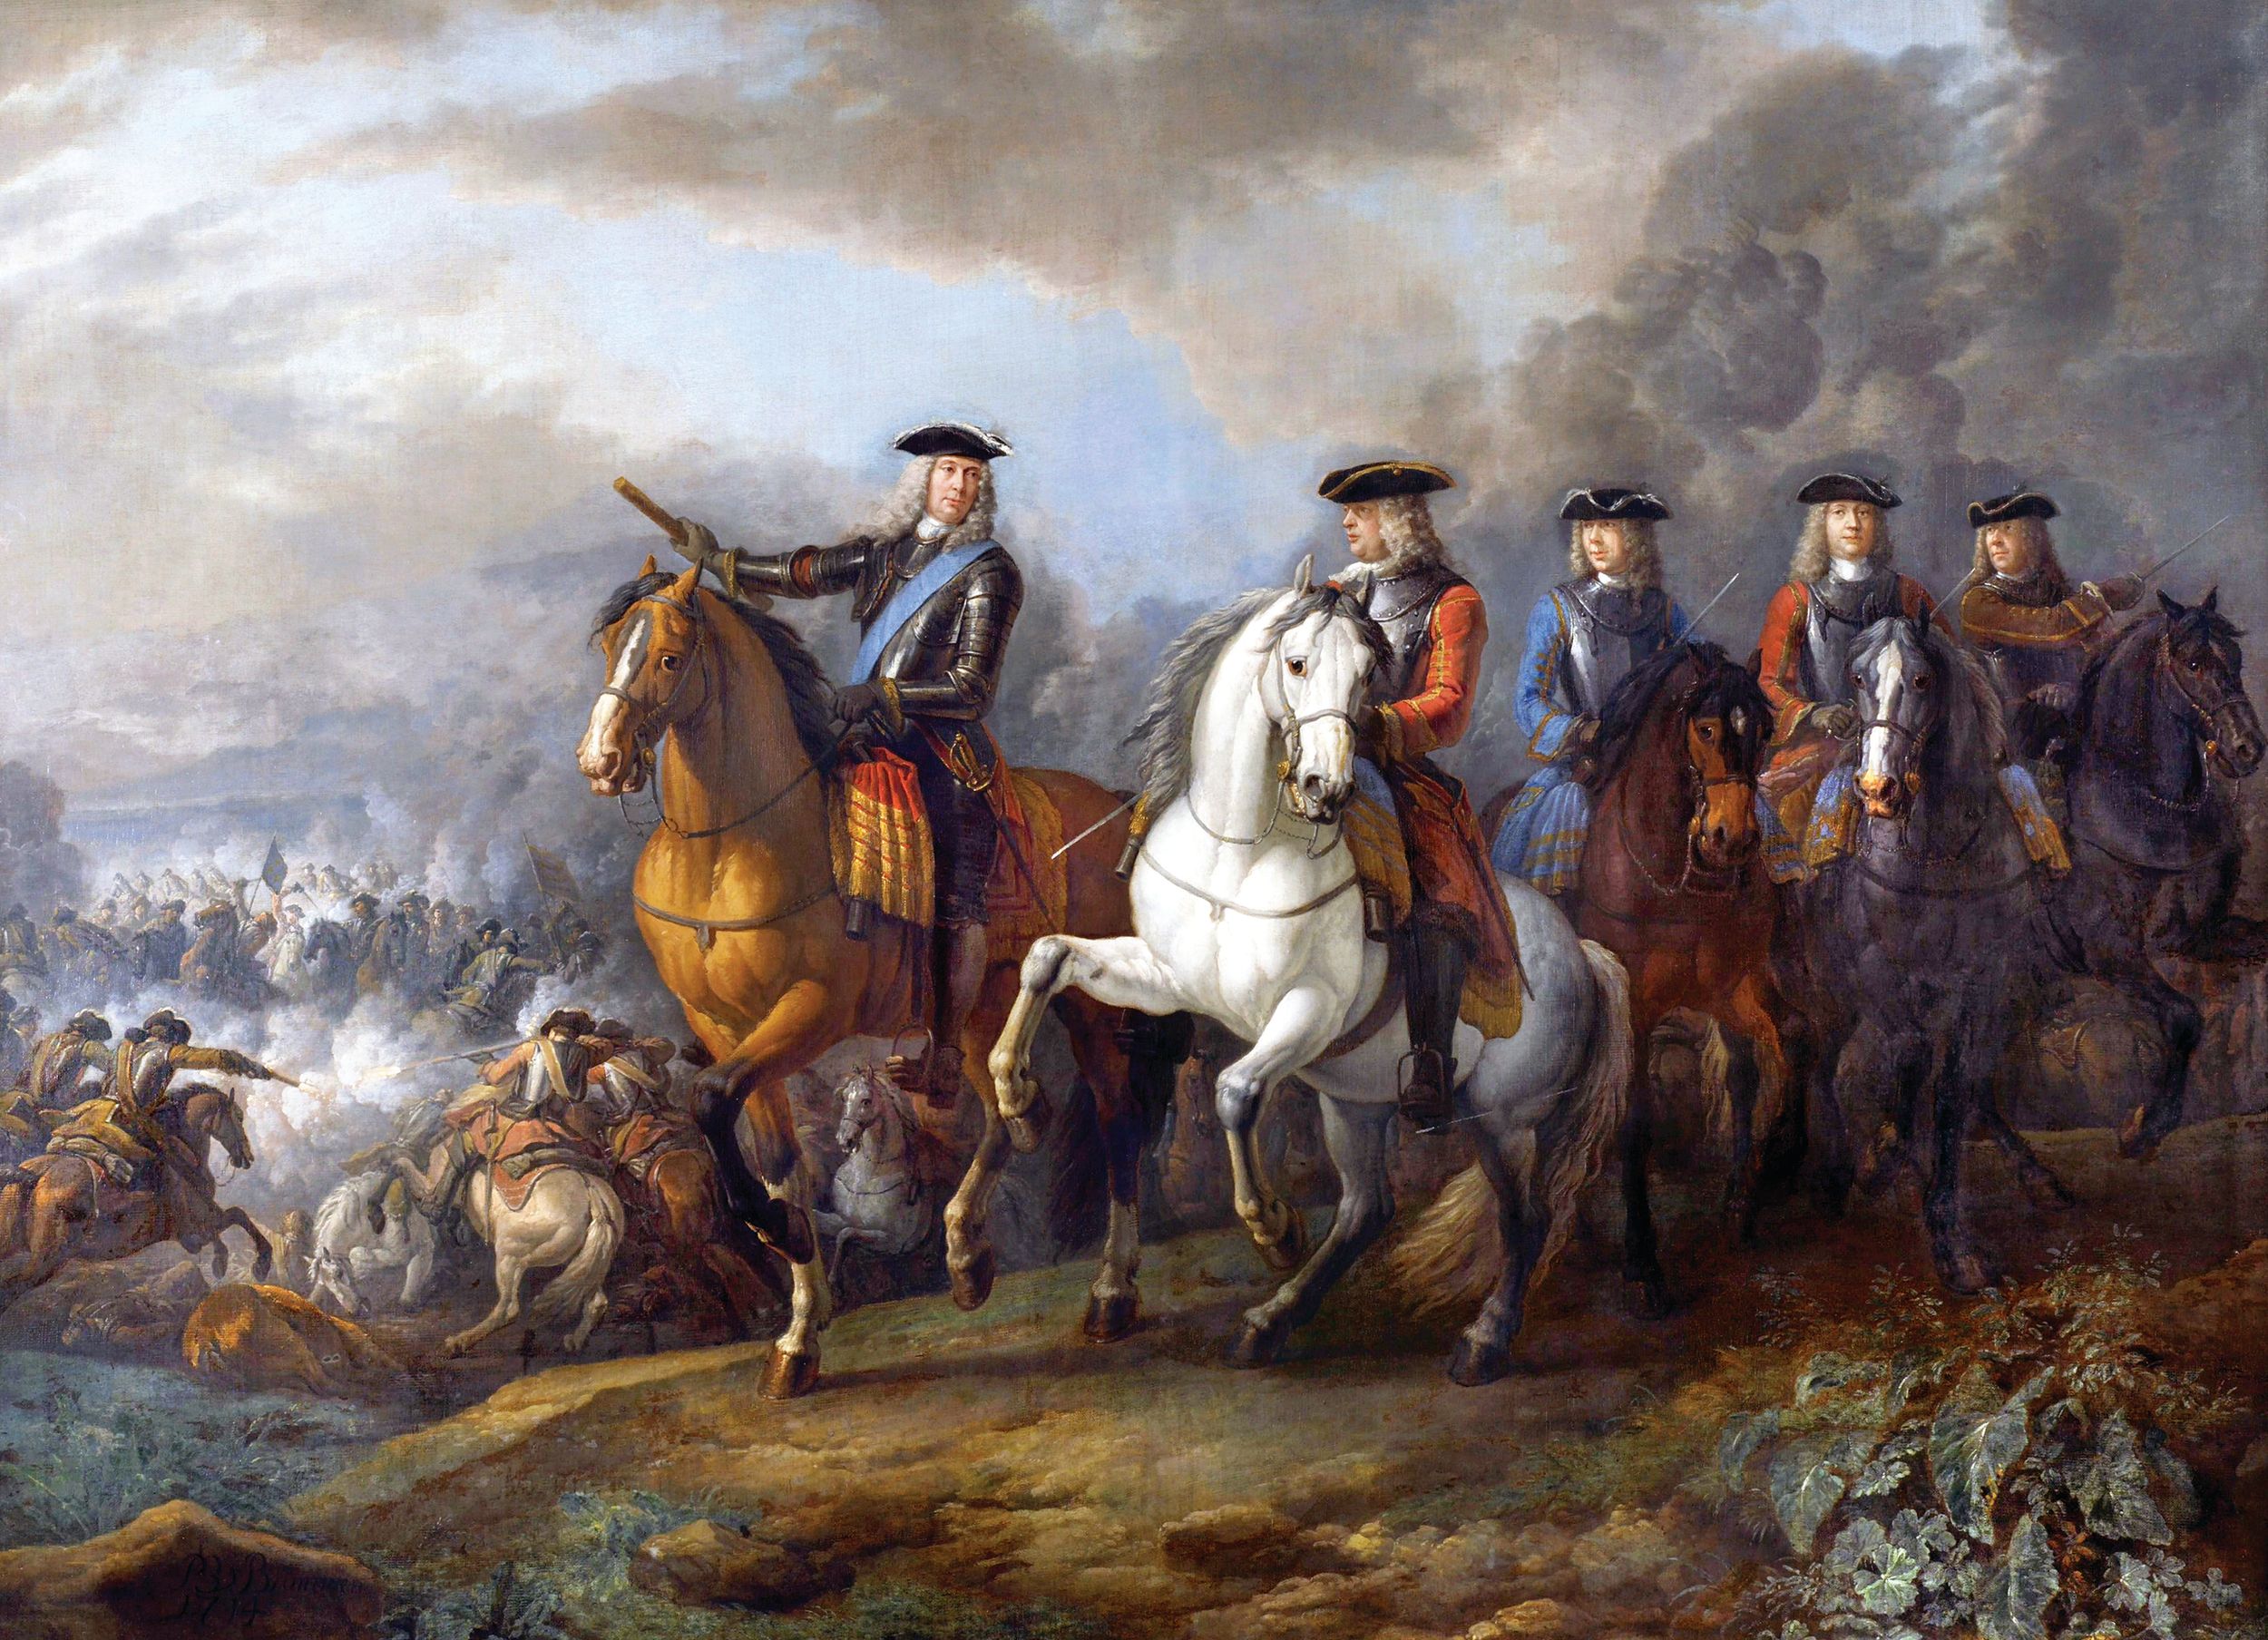 Marlborough directs his troops at Blenheim in 1704. One of the great captains of the 18th century, he marched deep into Germany and defeated the vaunted French on the banks of the Danube River.